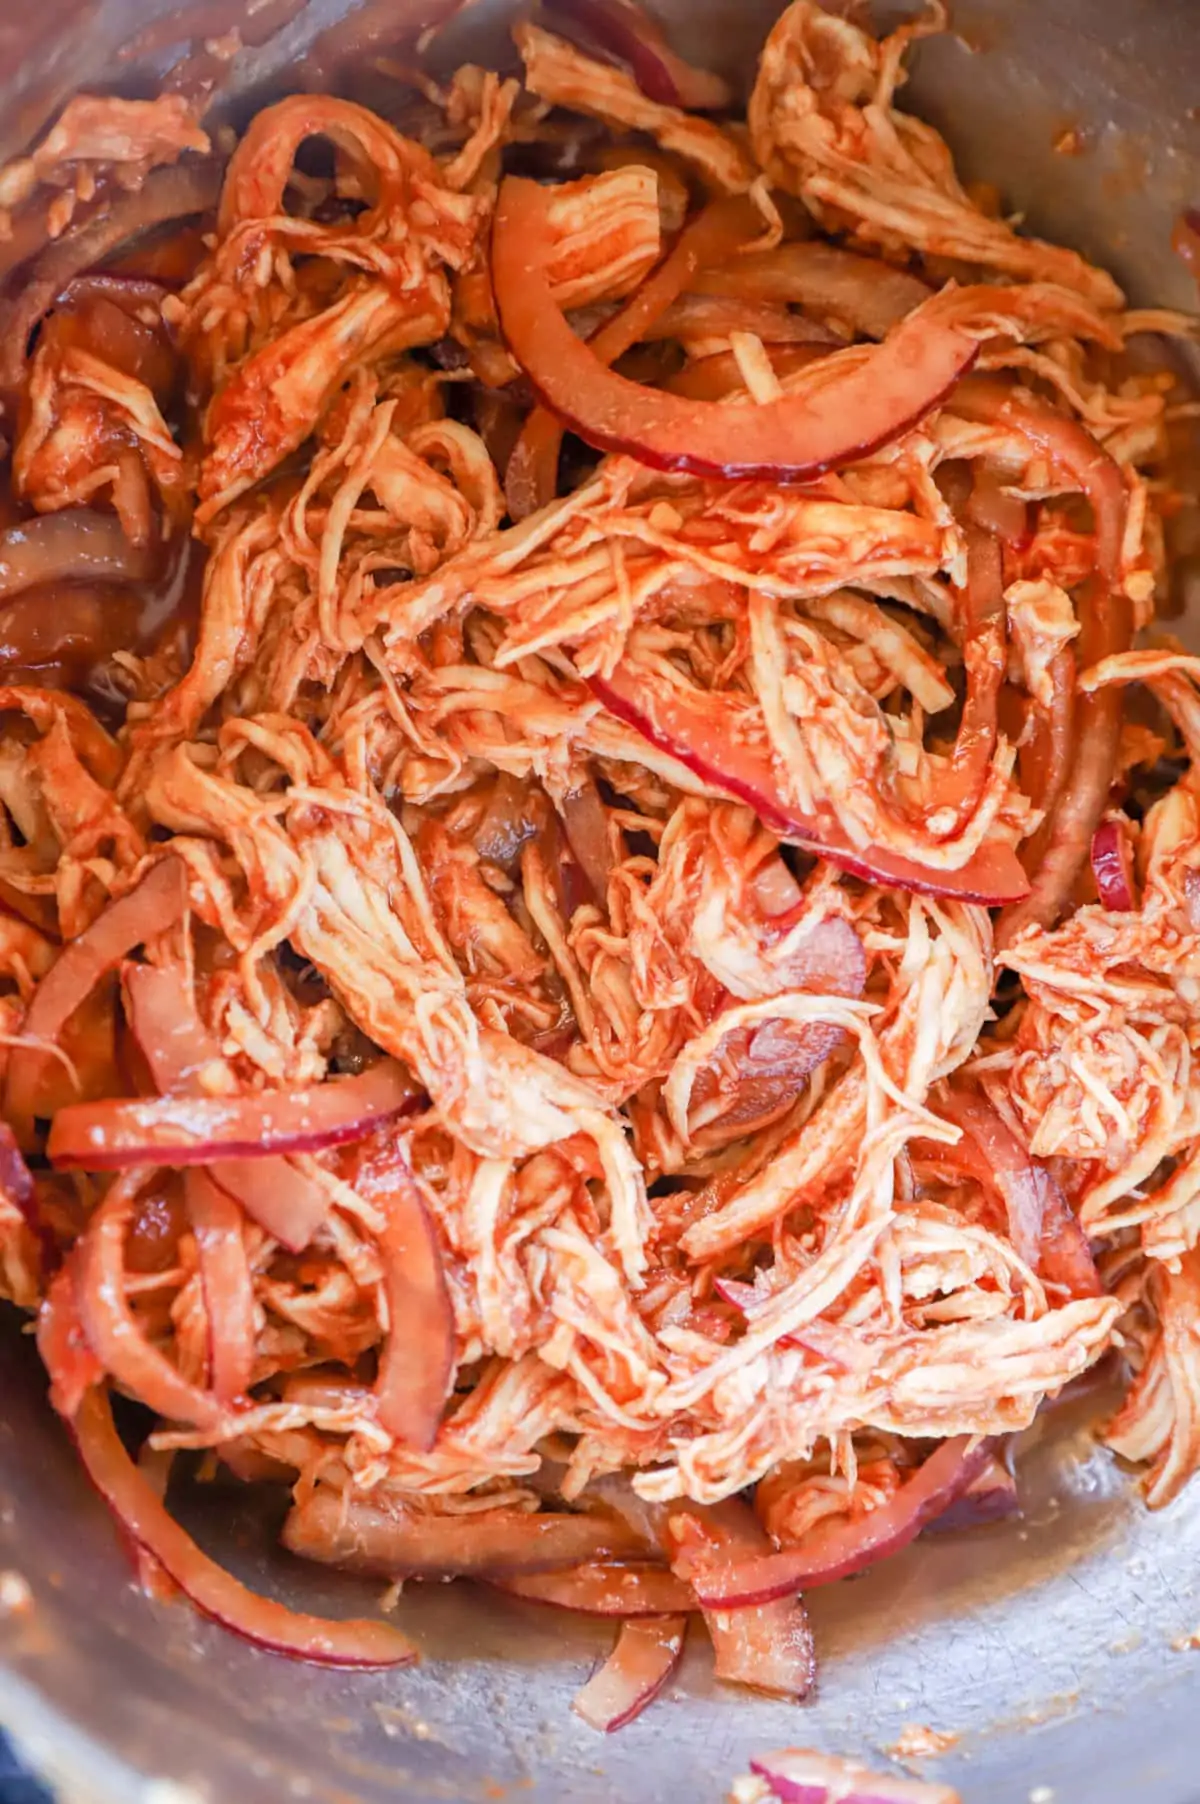 Image of shredded chicken with red onion